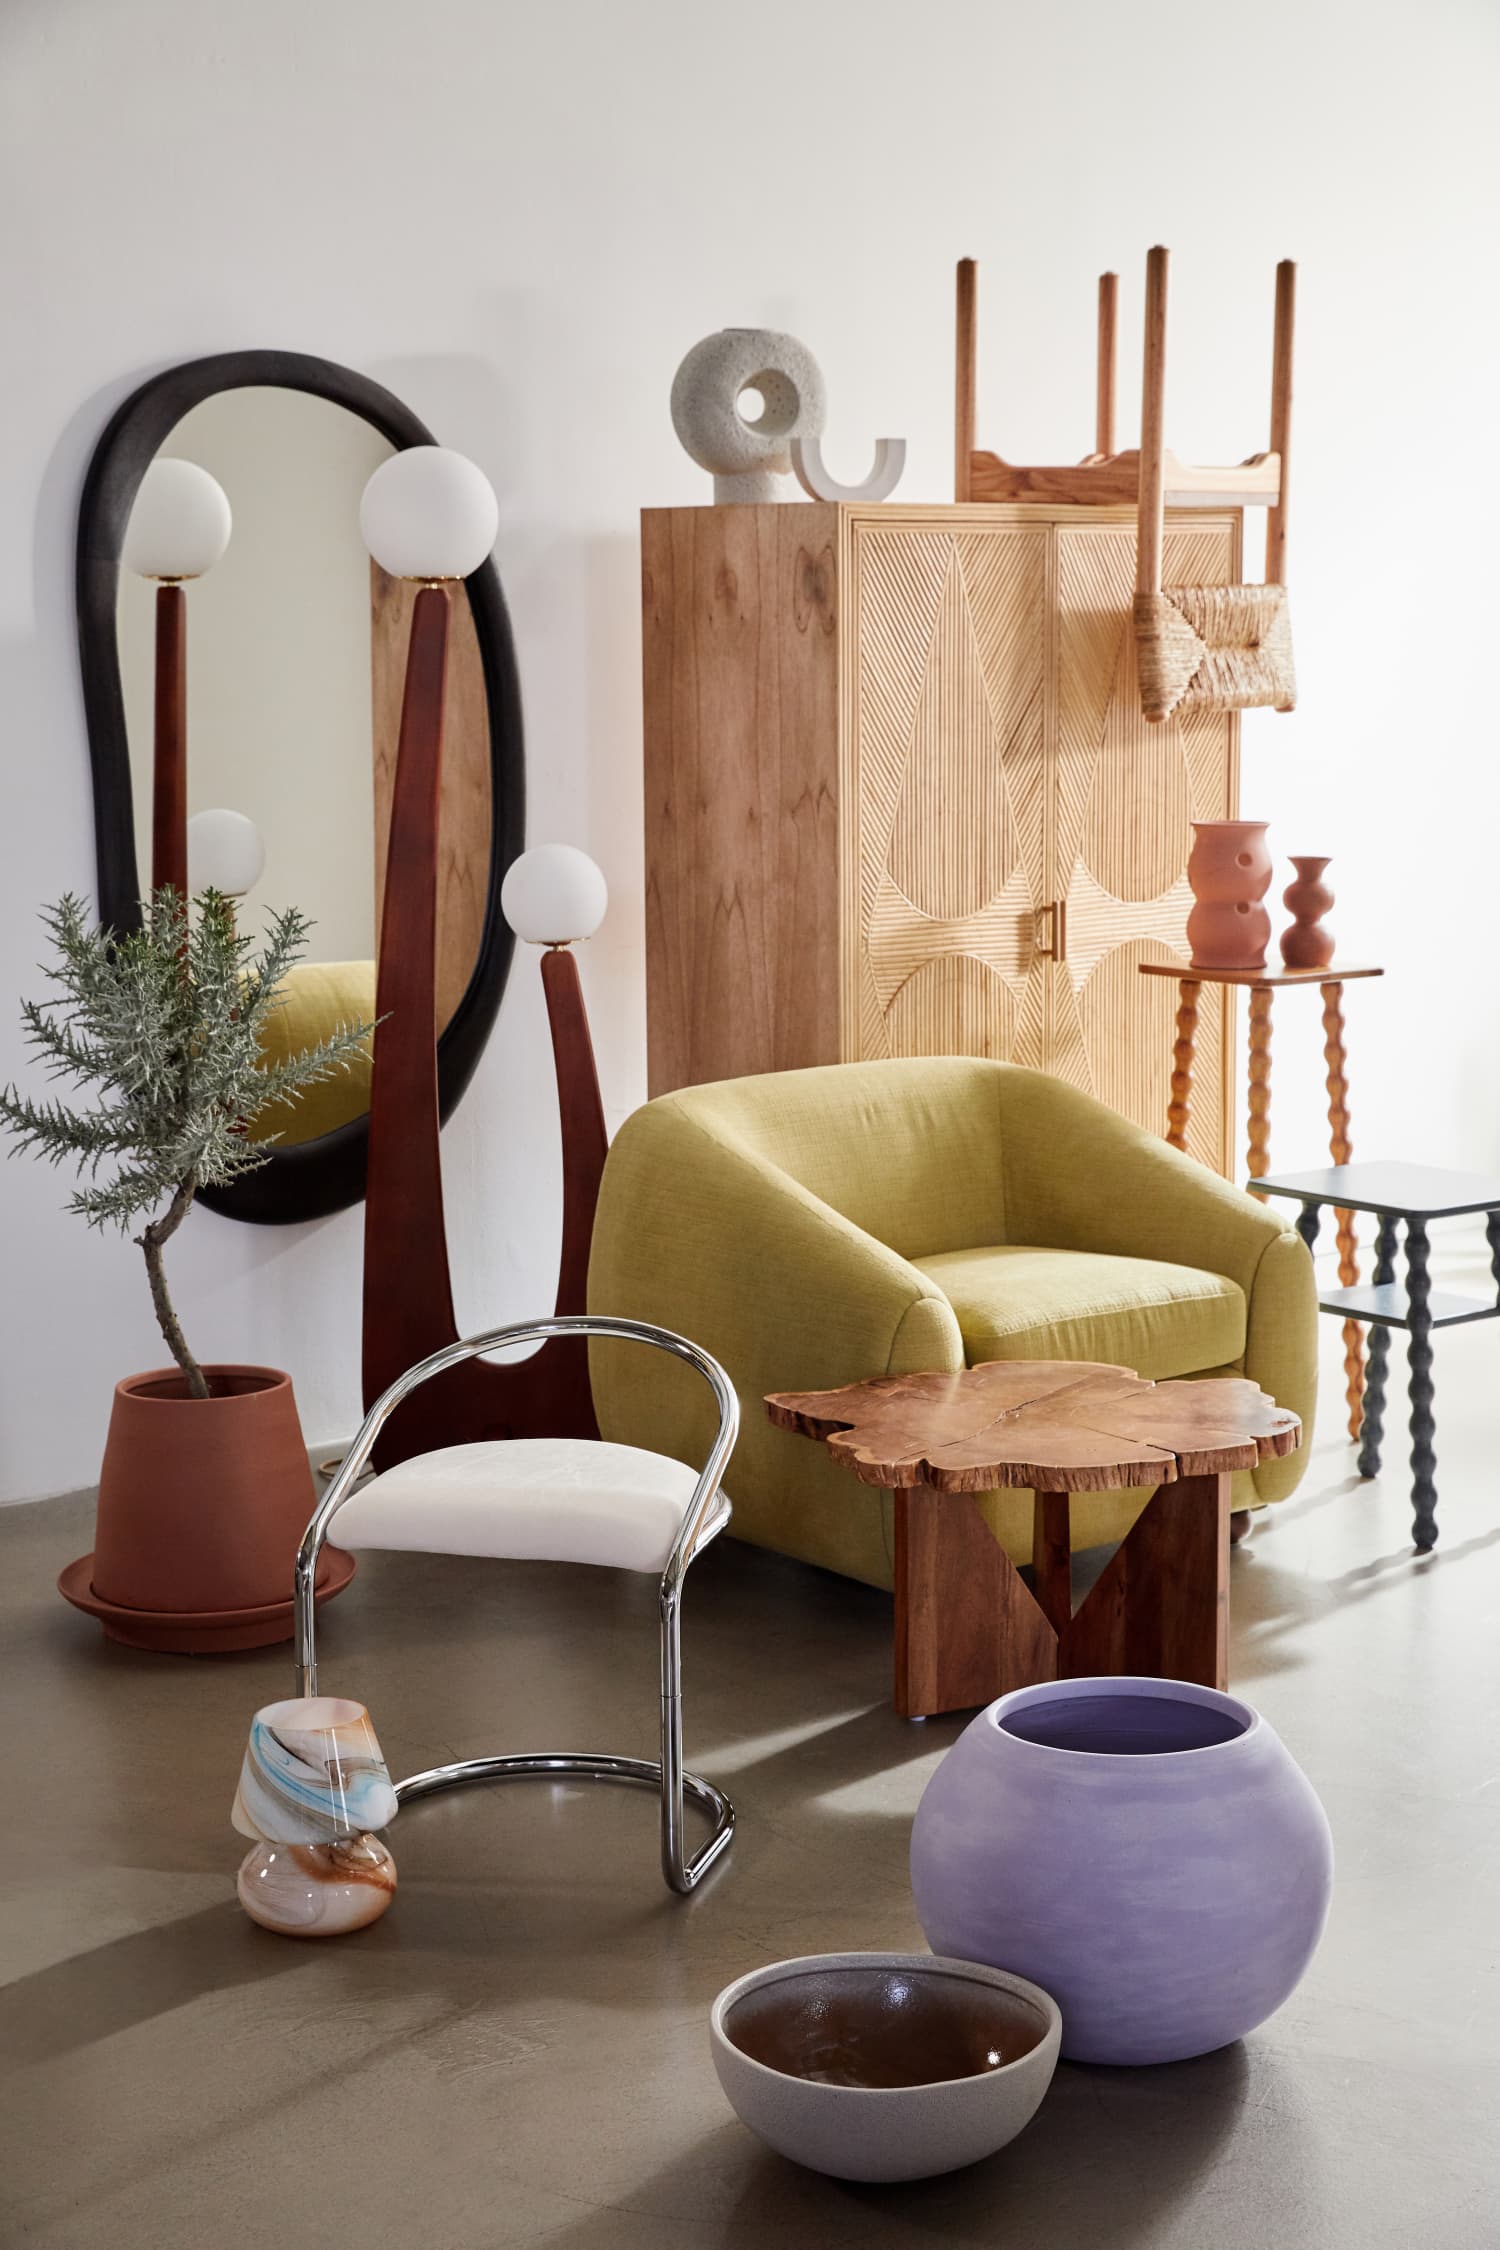 Urban Outfitters Fall 2020 Furniture Collections | Apartment Therapy